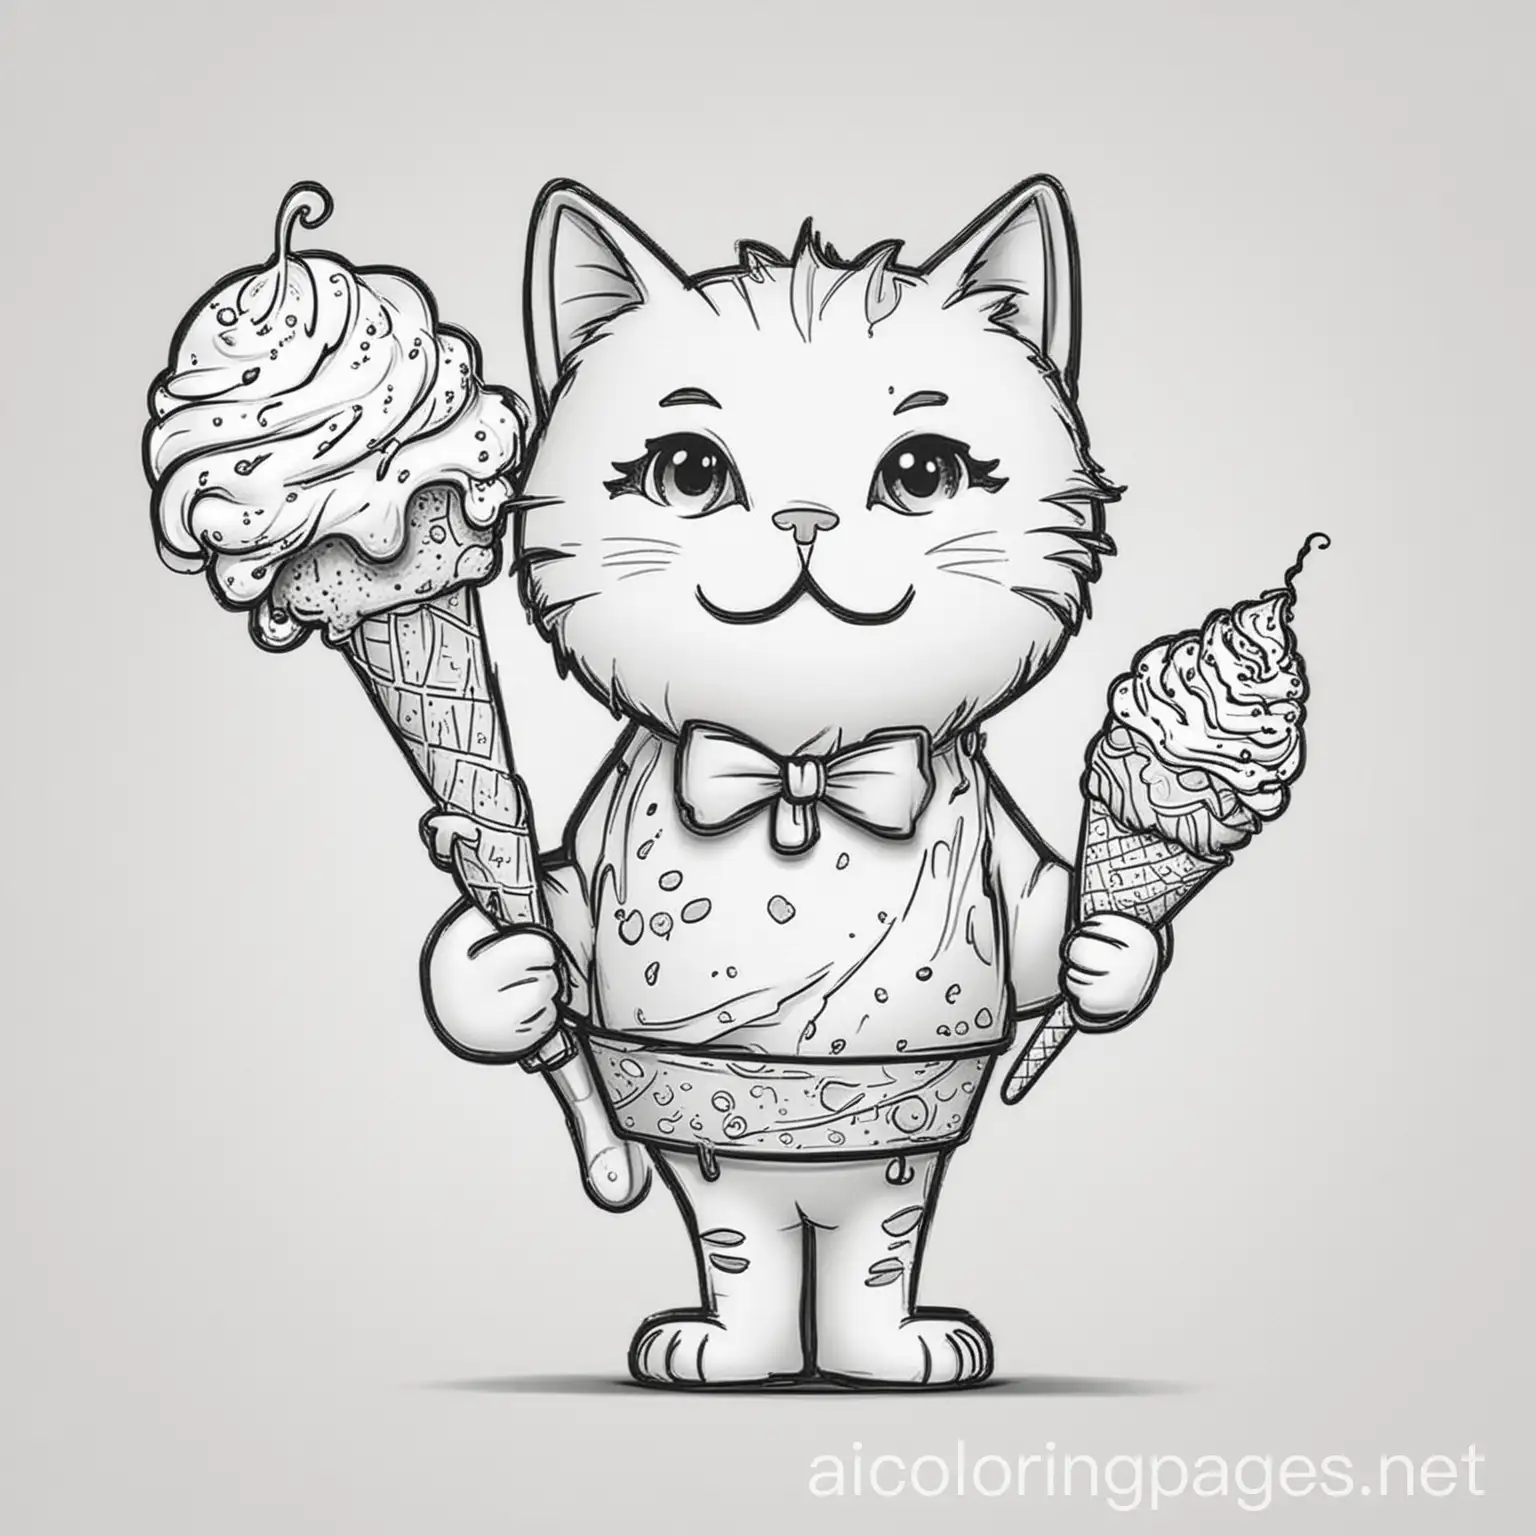 Cartoon Cat with ice cream, Coloring Page, black and white, line art, white background, Simplicity, Ample White Space. The background of the coloring page is plain white to make it easy for young children to color within the lines. The outlines of all the subjects are easy to distinguish, making it simple for kids to color without too much difficulty